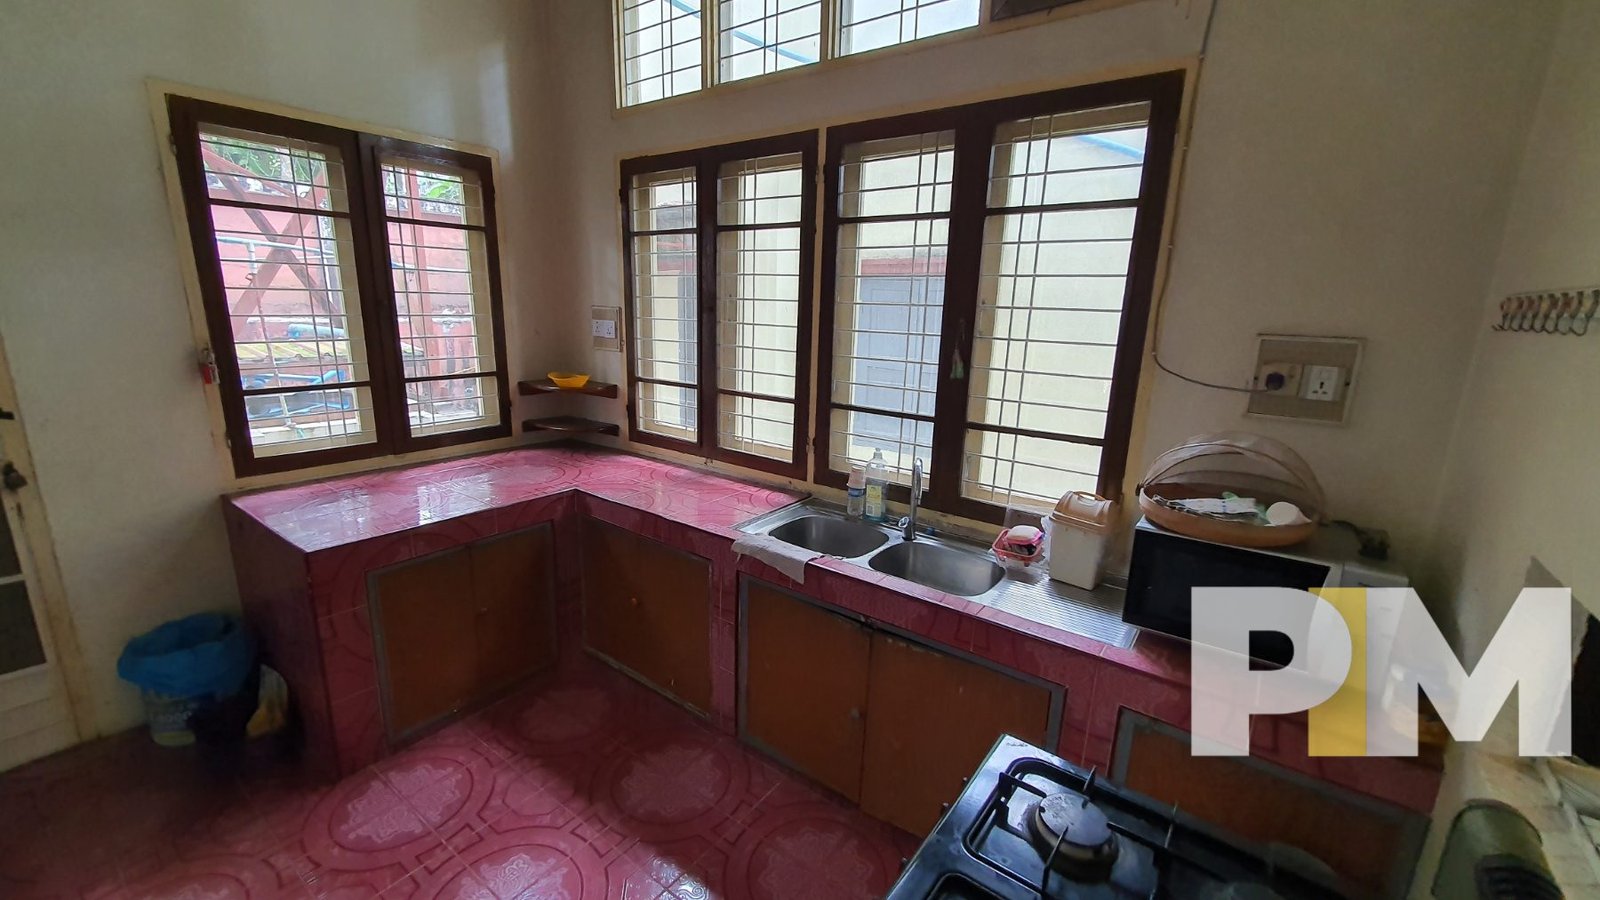 kitchen with cabinets - House for rent in Golden Valley